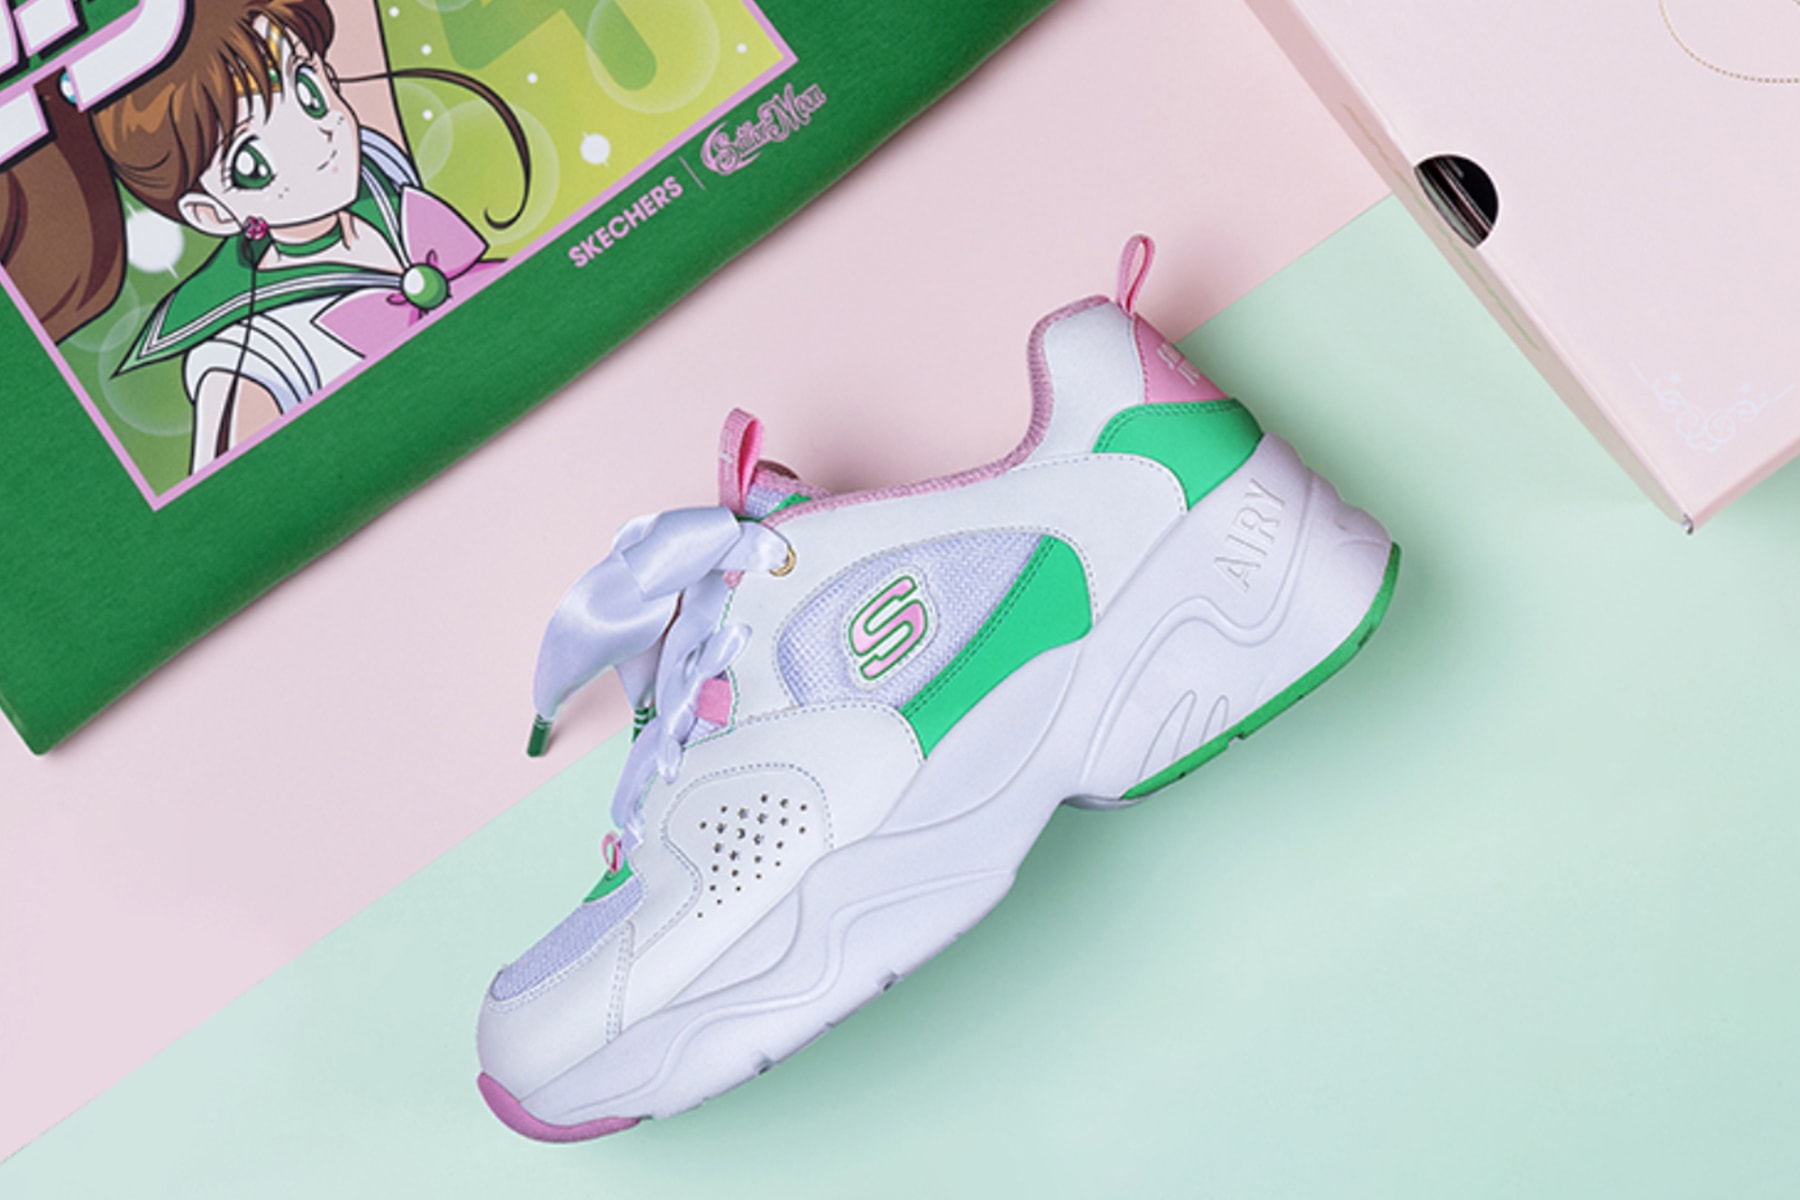 Sailor Moon x Skechers Sneaker Collaboration Release Collection